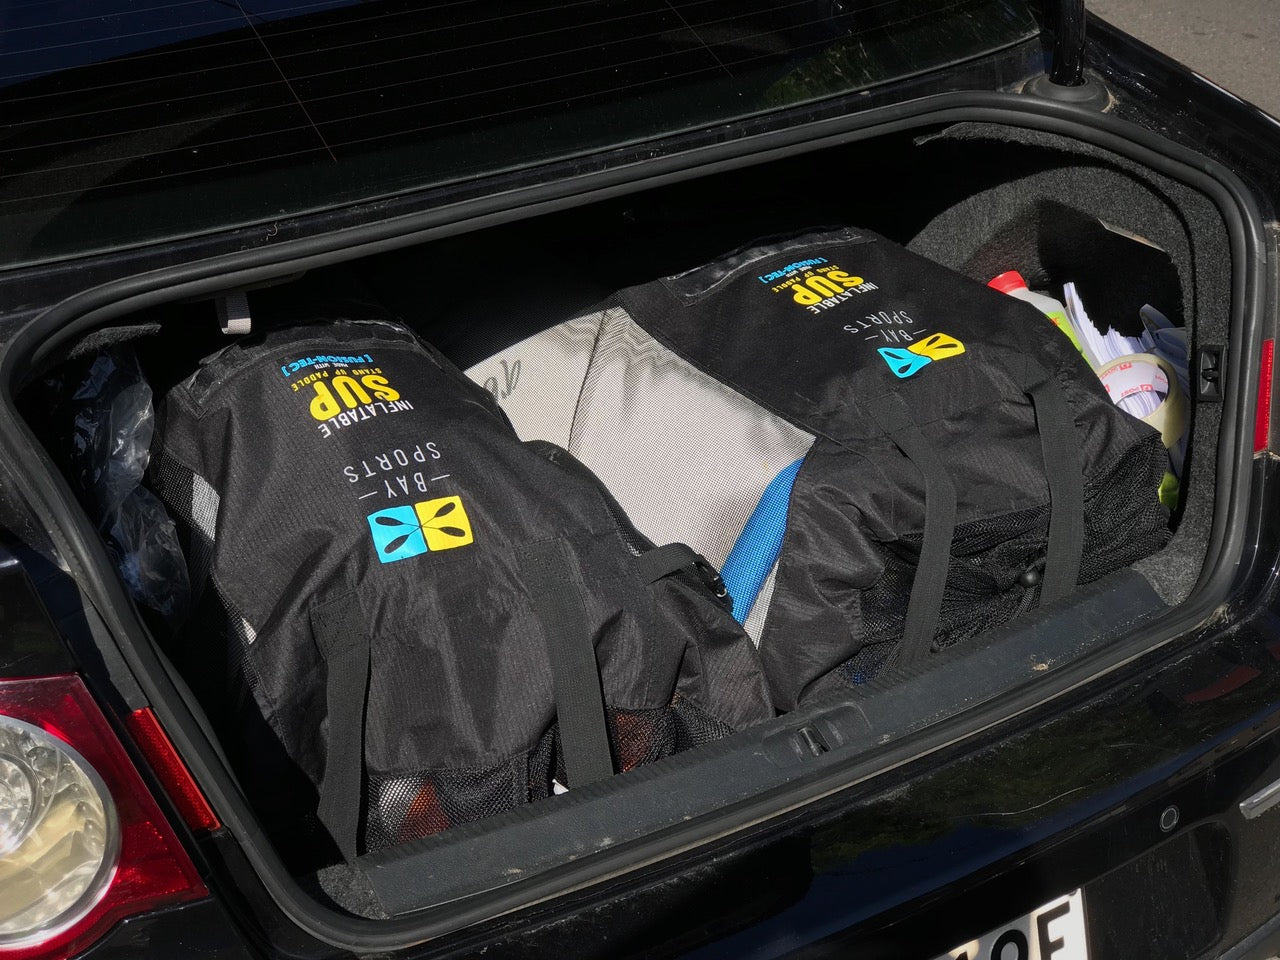 Bay Sports iSUP in car boot